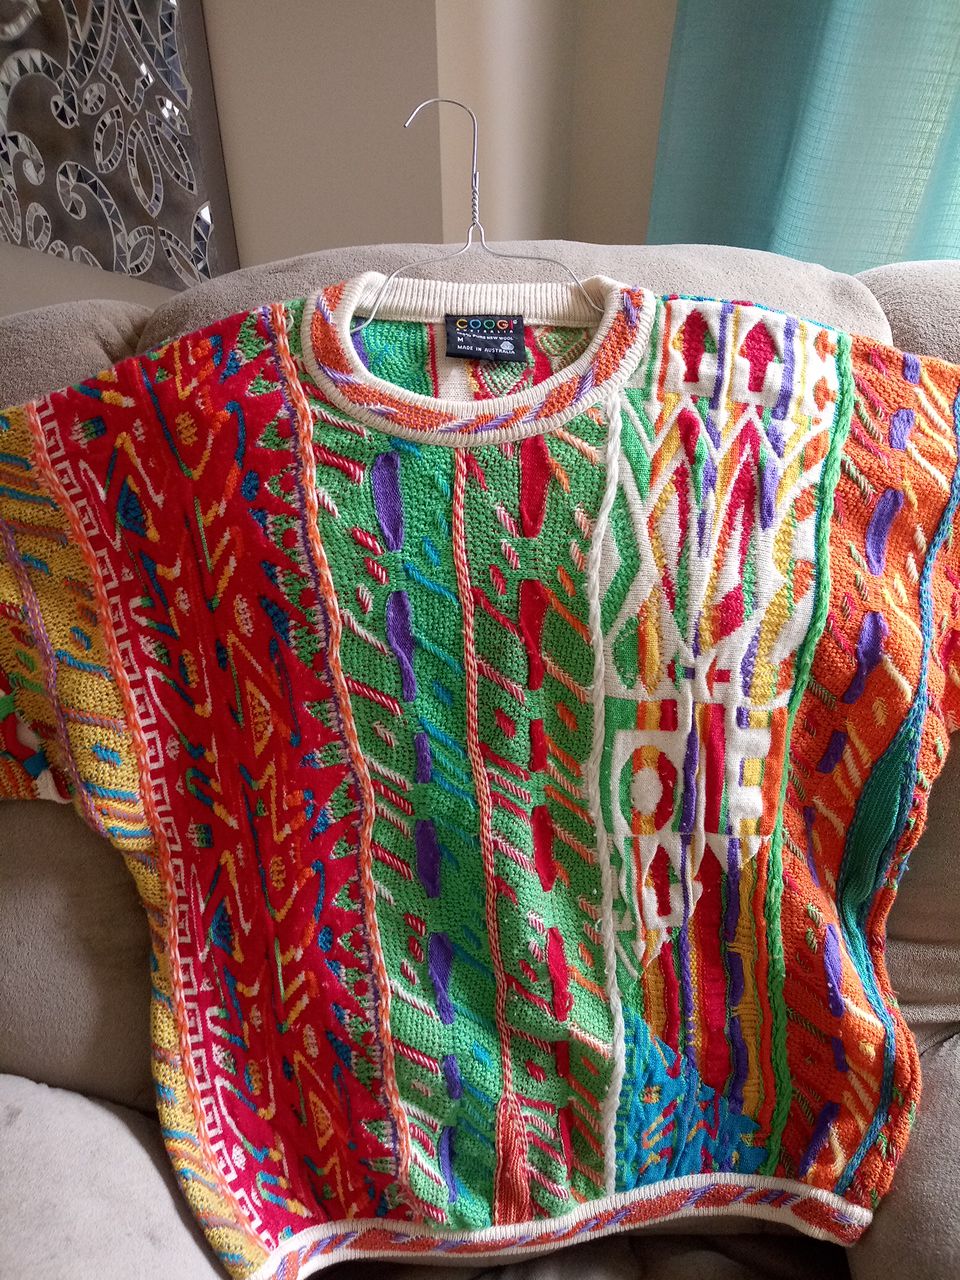 Coogi sweaters (2size M purple one large) "EXTREMELY VINTAGE/RARE" A+Quality